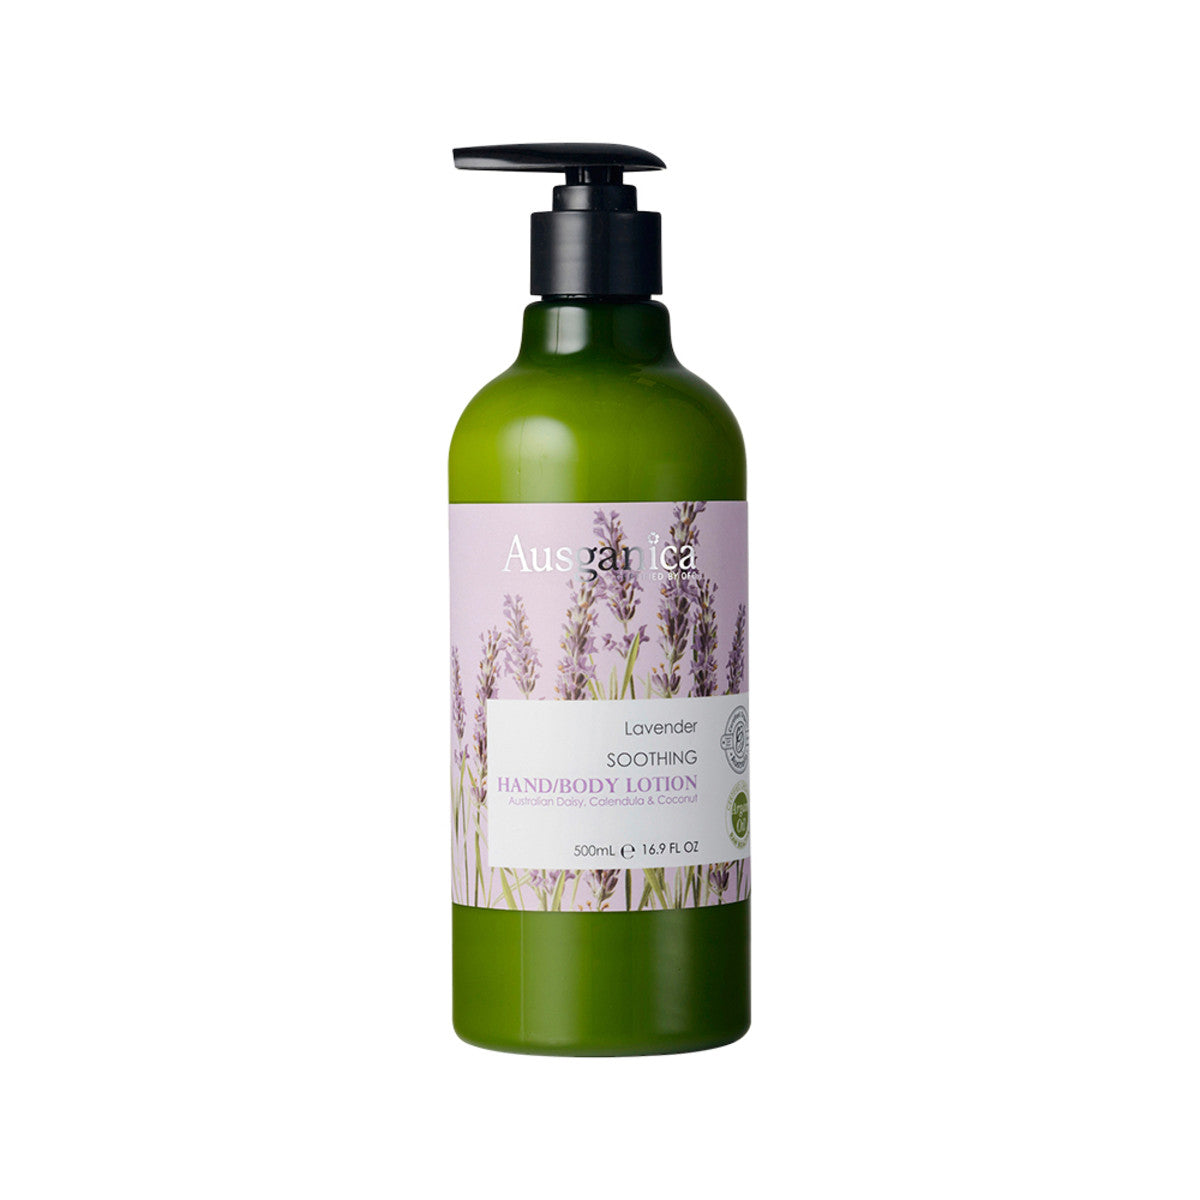 Ausganica - Lavender Soothing Hand Body Lotion